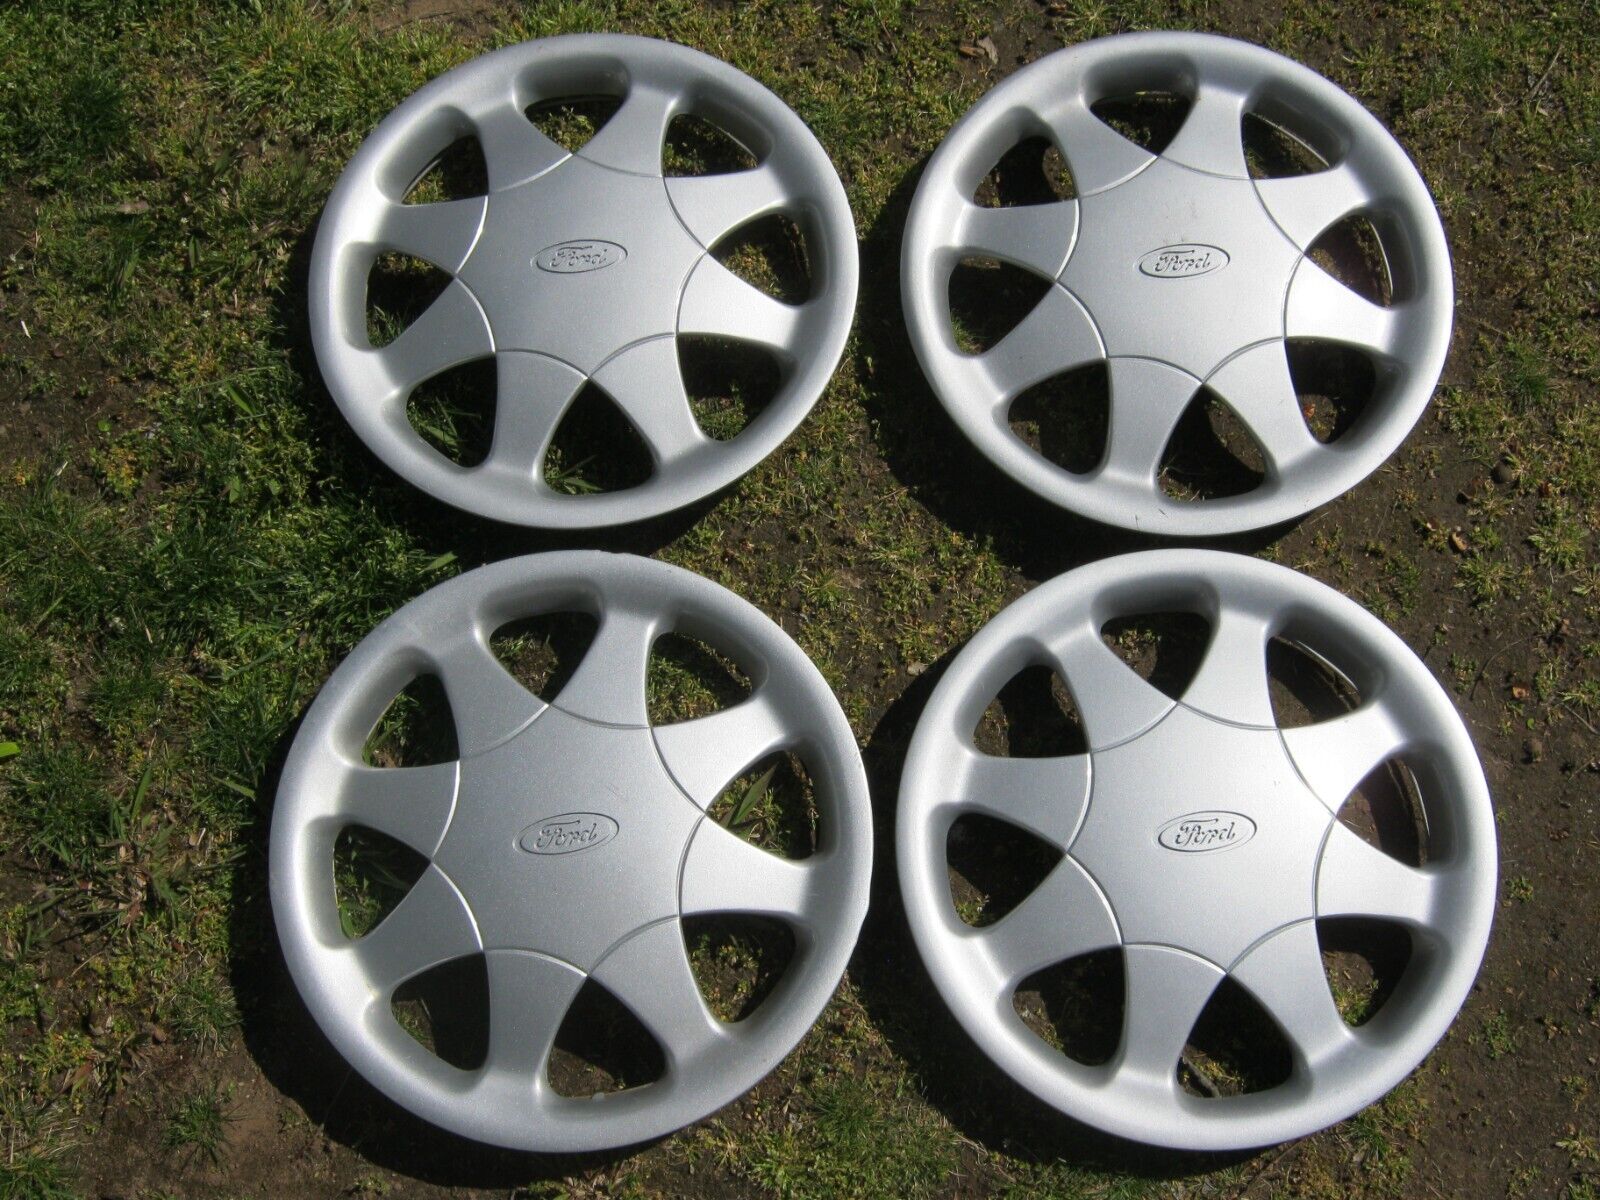 Factory original Ford Aspire 13 inch hubcaps wheel covers